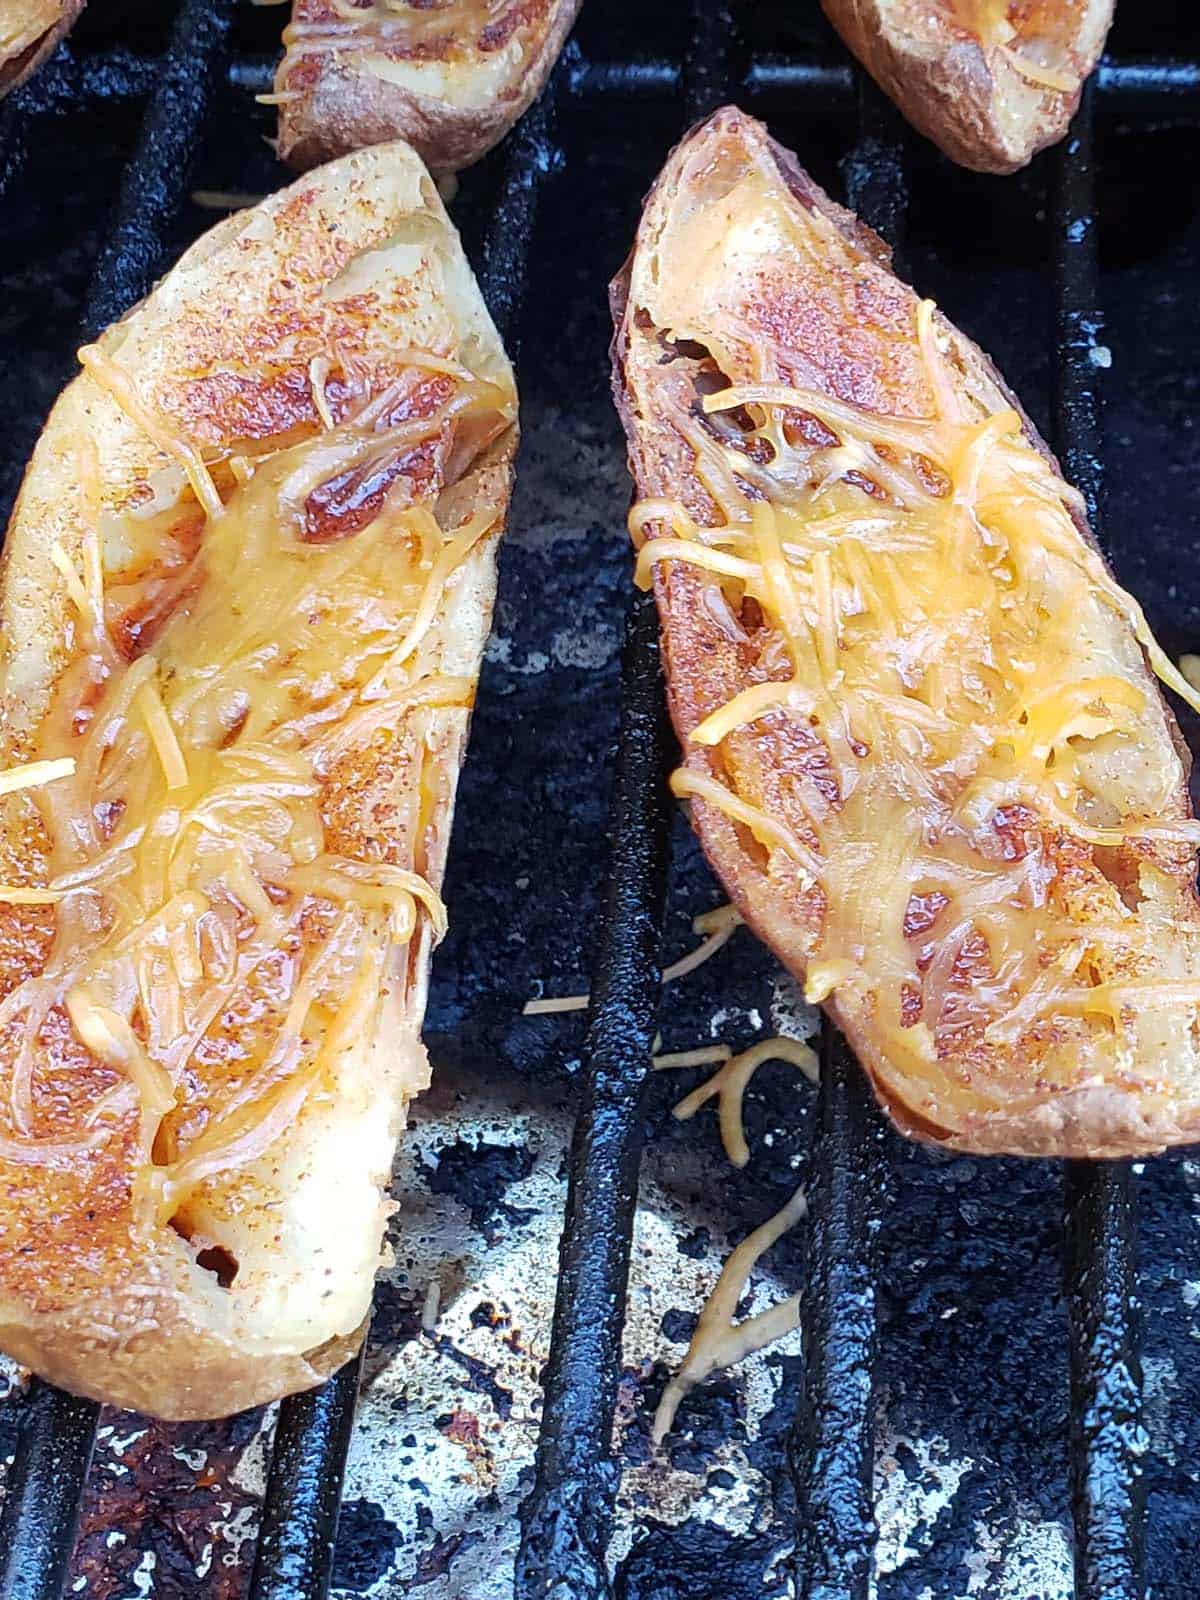 Smoked potato skins with melted cheese on a grill.